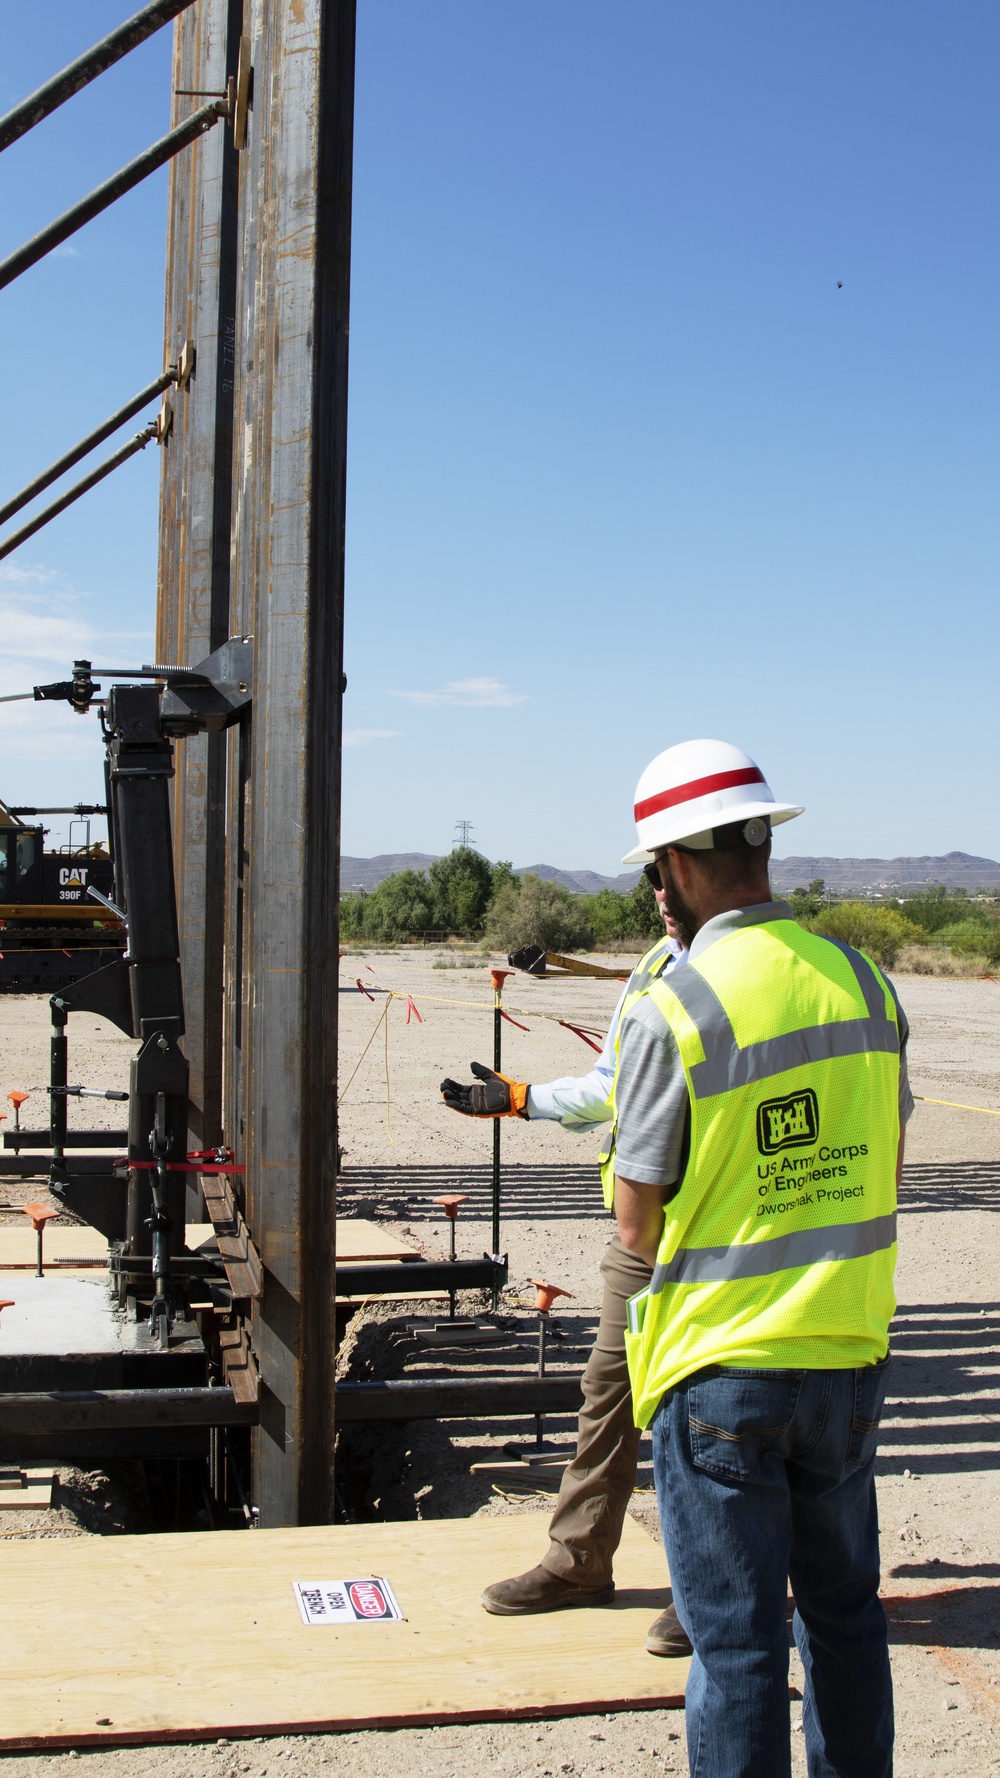 Tucson Barrier Replacement operational site visit